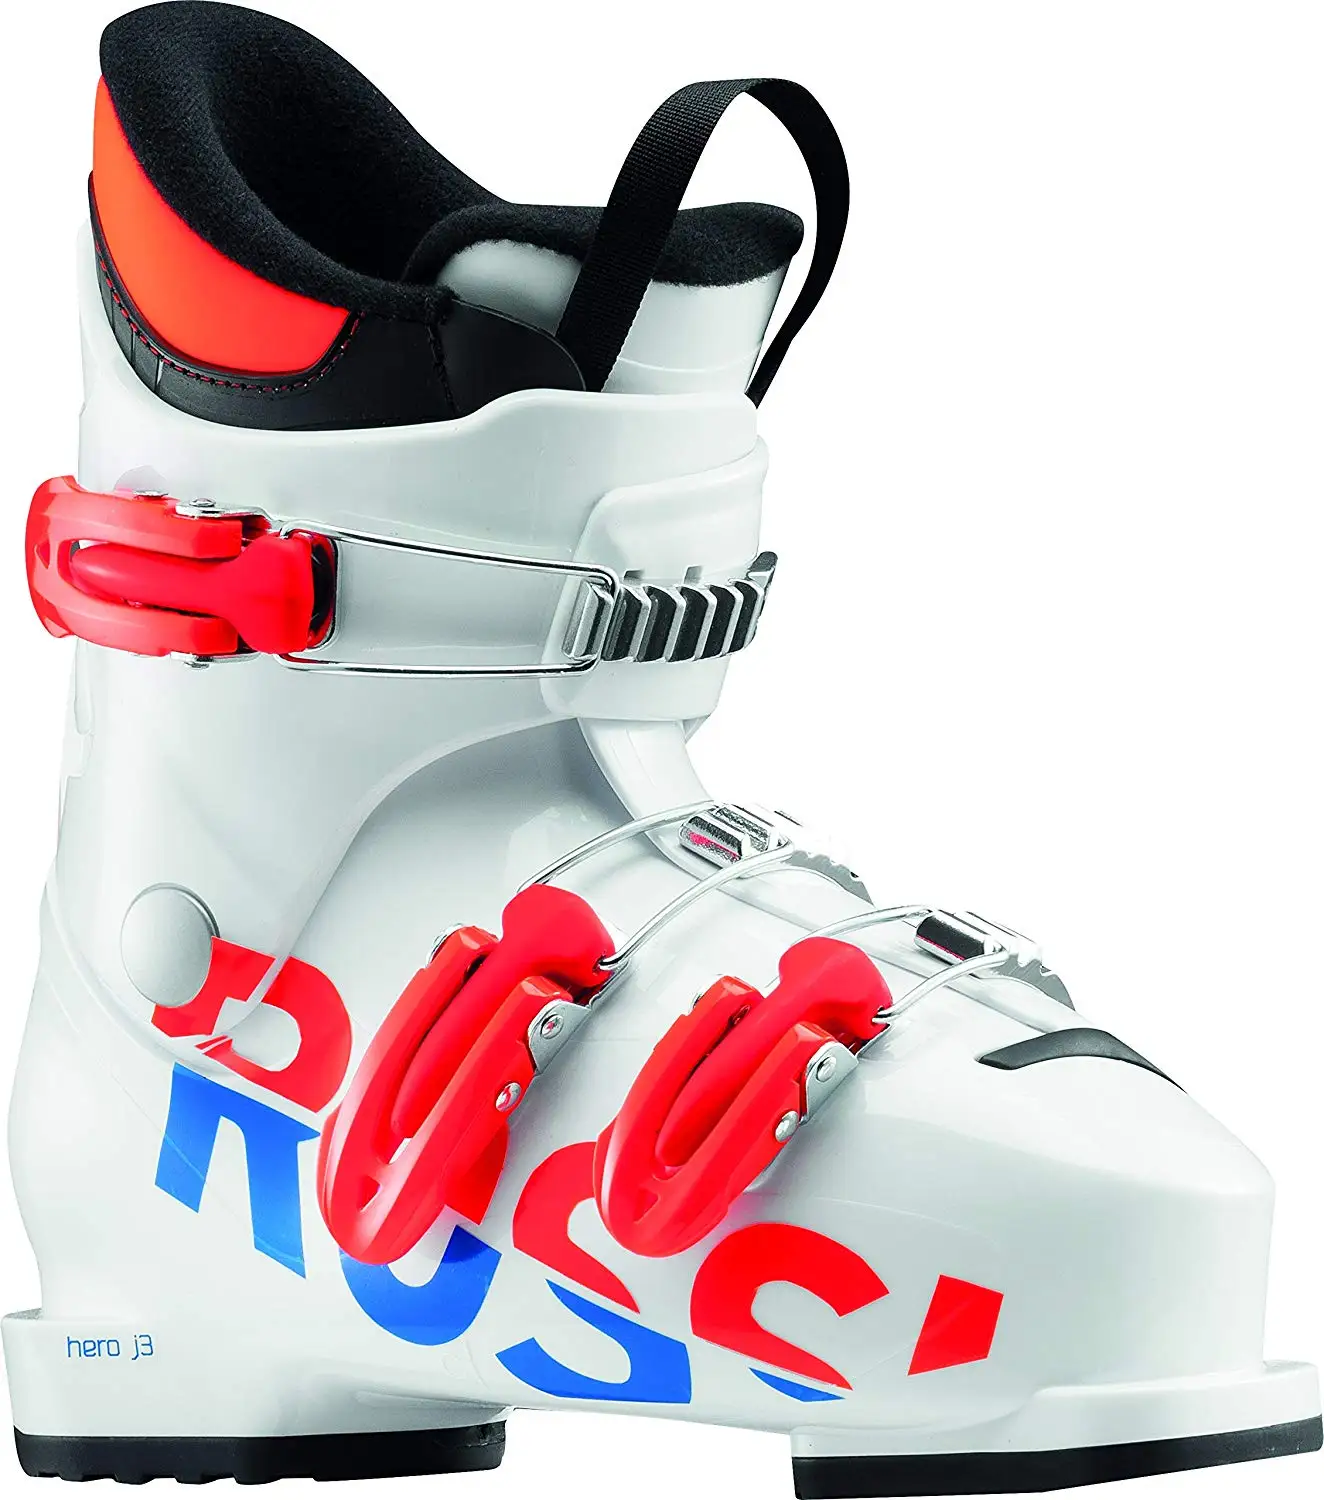 Rossignol Xc Boot Size Chart